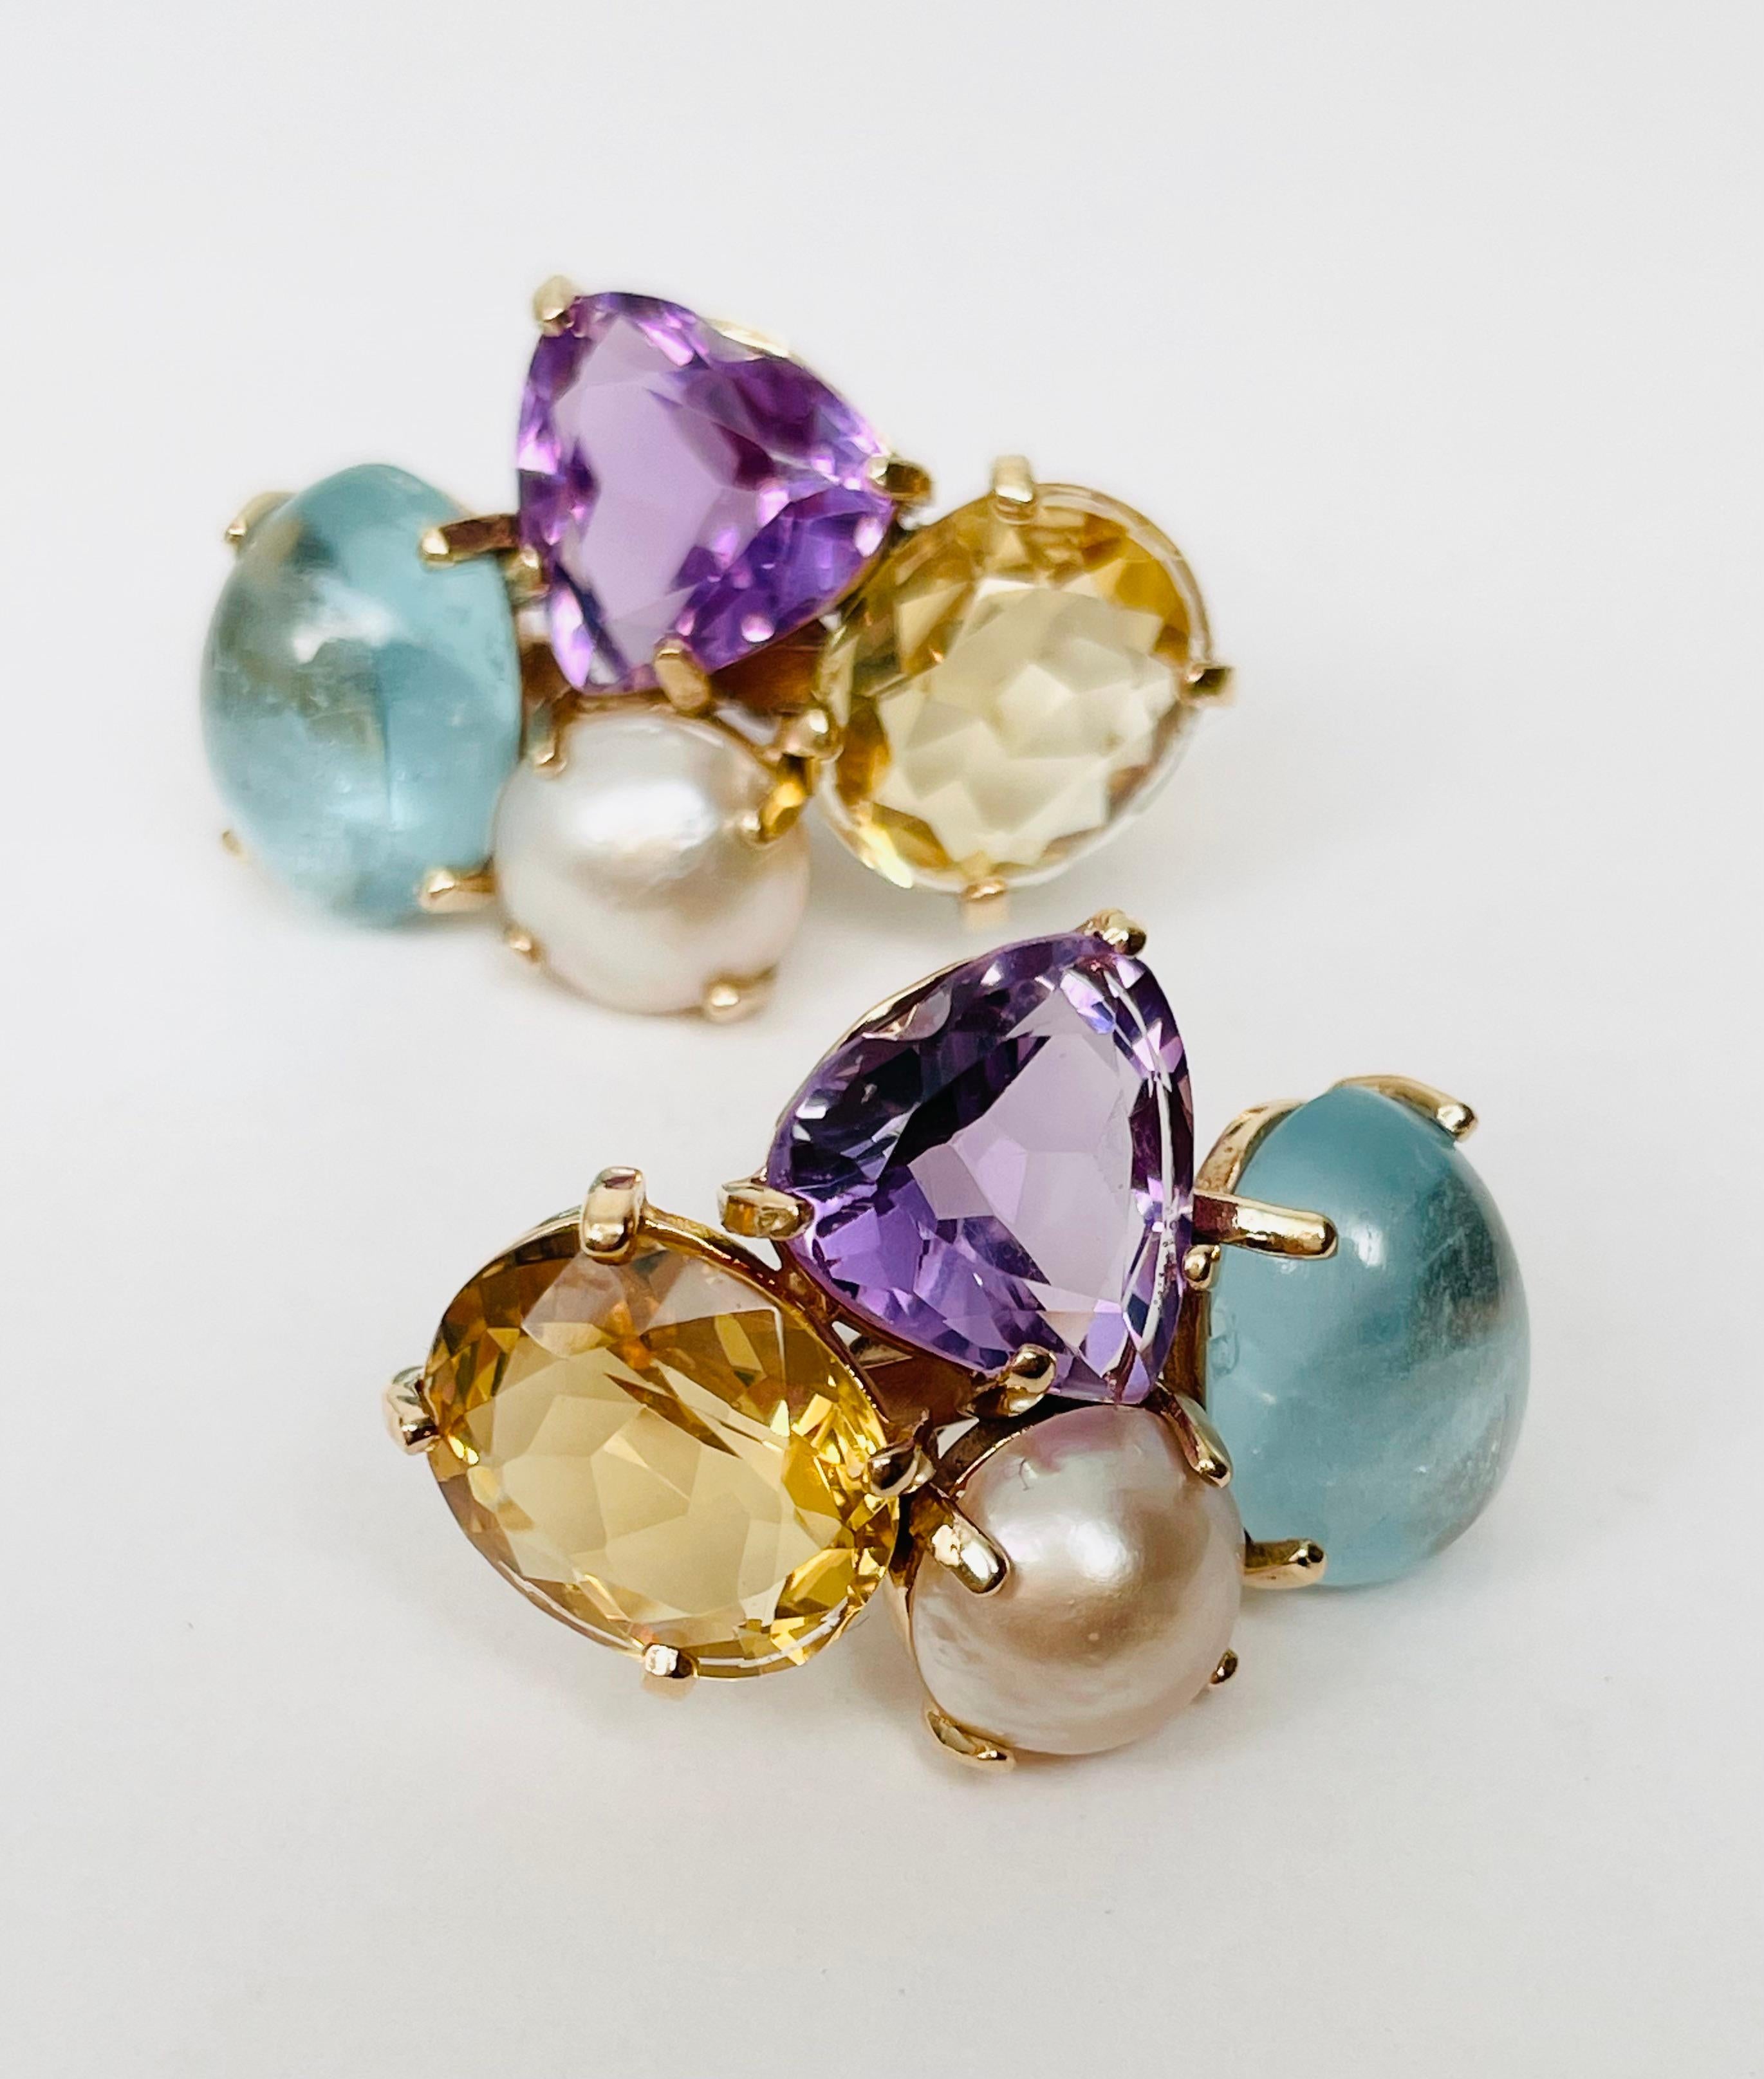 Oval Cut Multi-Colored Stone Earrings with Amethyst, Aquamarine, Citrine and Pearl